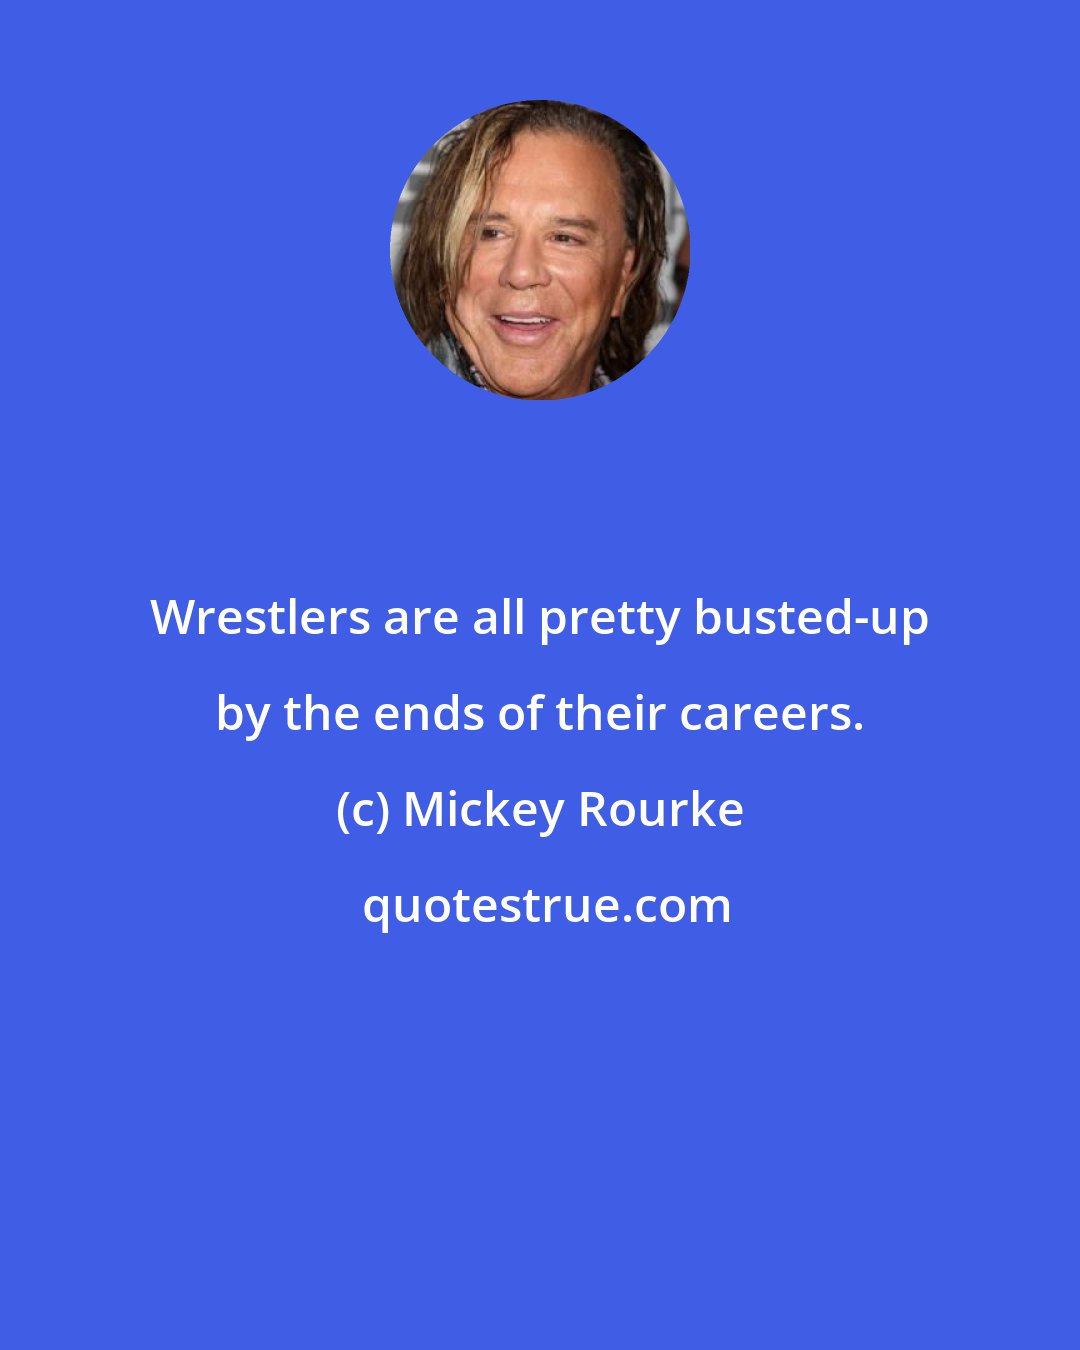 Mickey Rourke: Wrestlers are all pretty busted-up by the ends of their careers.